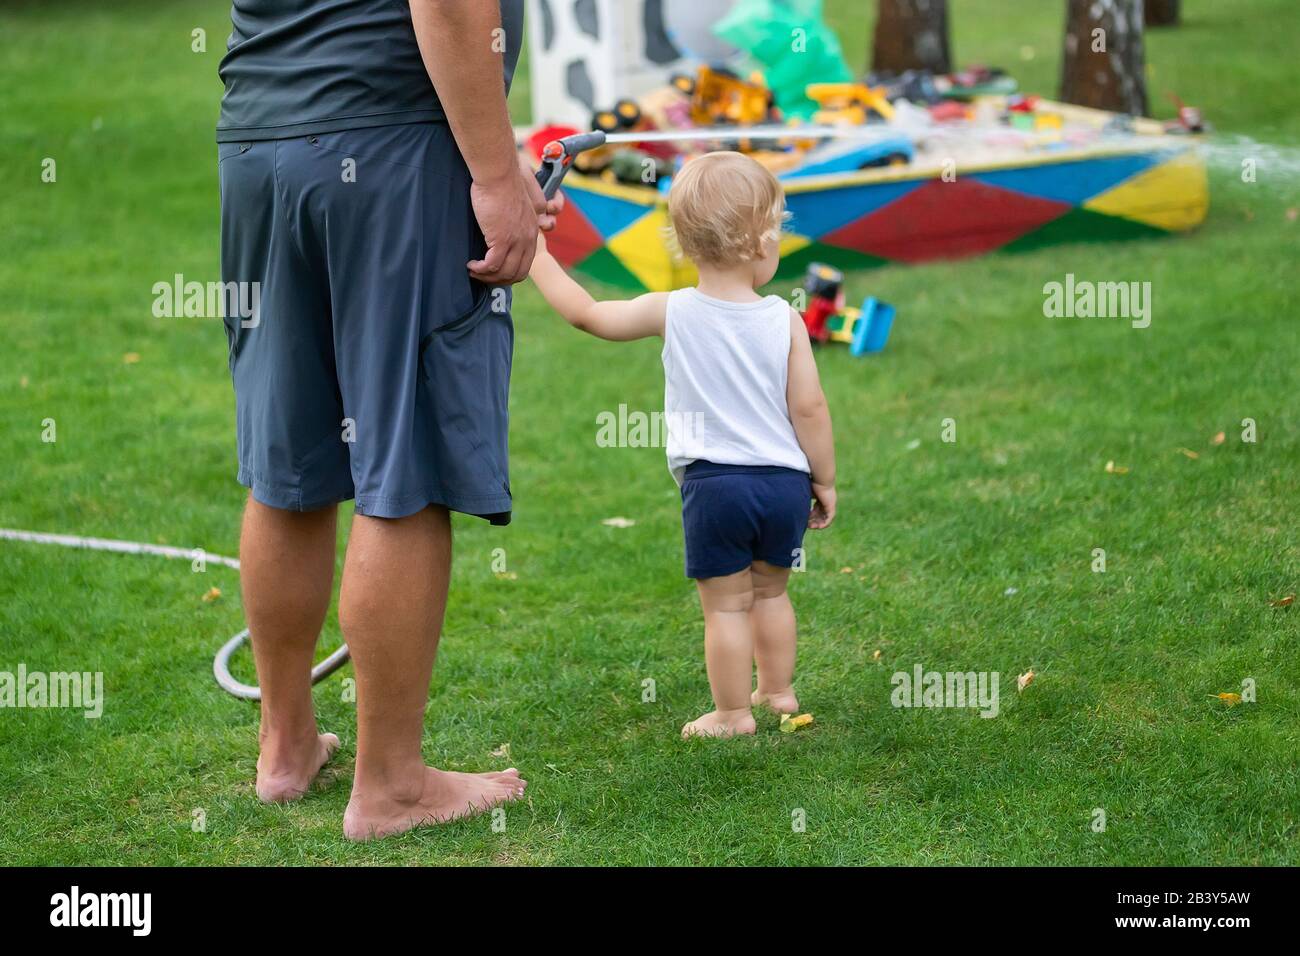 Father with son together watering garden and green grass lawn at home backyard outdoors on brigh summer warm day. Male person with little toddler boy Stock Photo